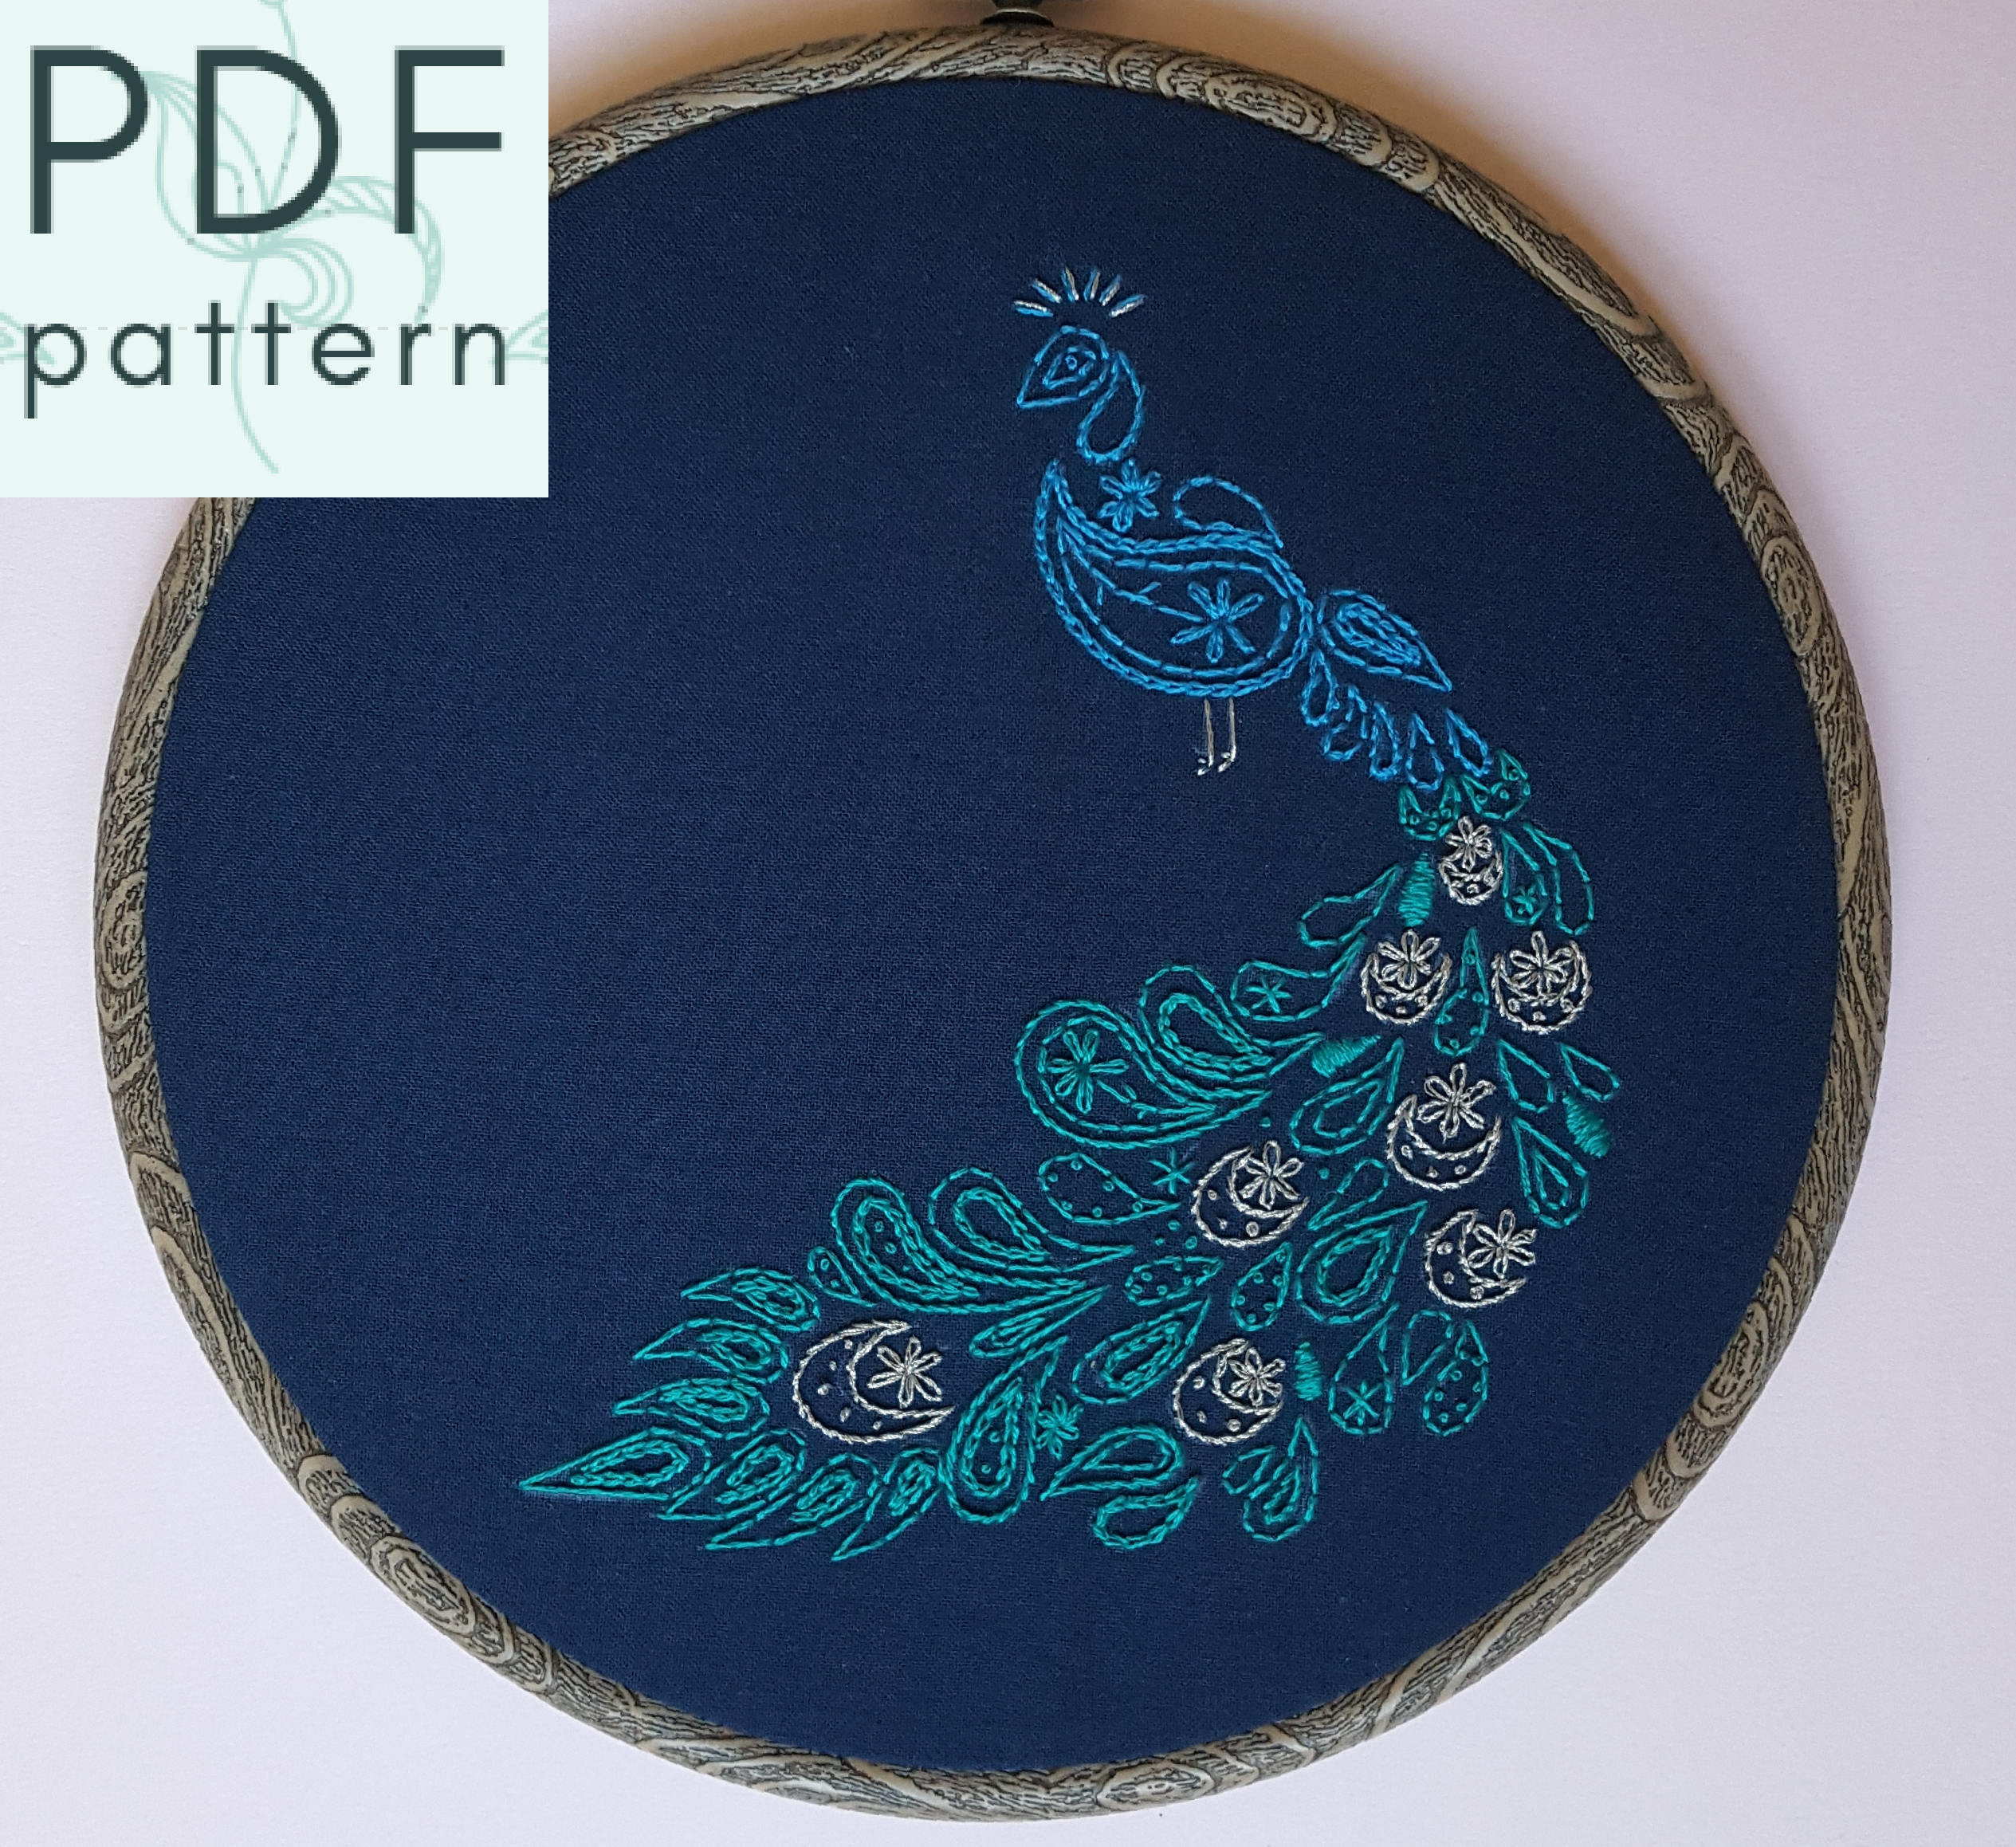 Peacock Embroidery Patterns Paisley Peacock Embroidery Pattern Pdf Hand Embroidery Contemporary Embroidery Hoop Art Instant Download